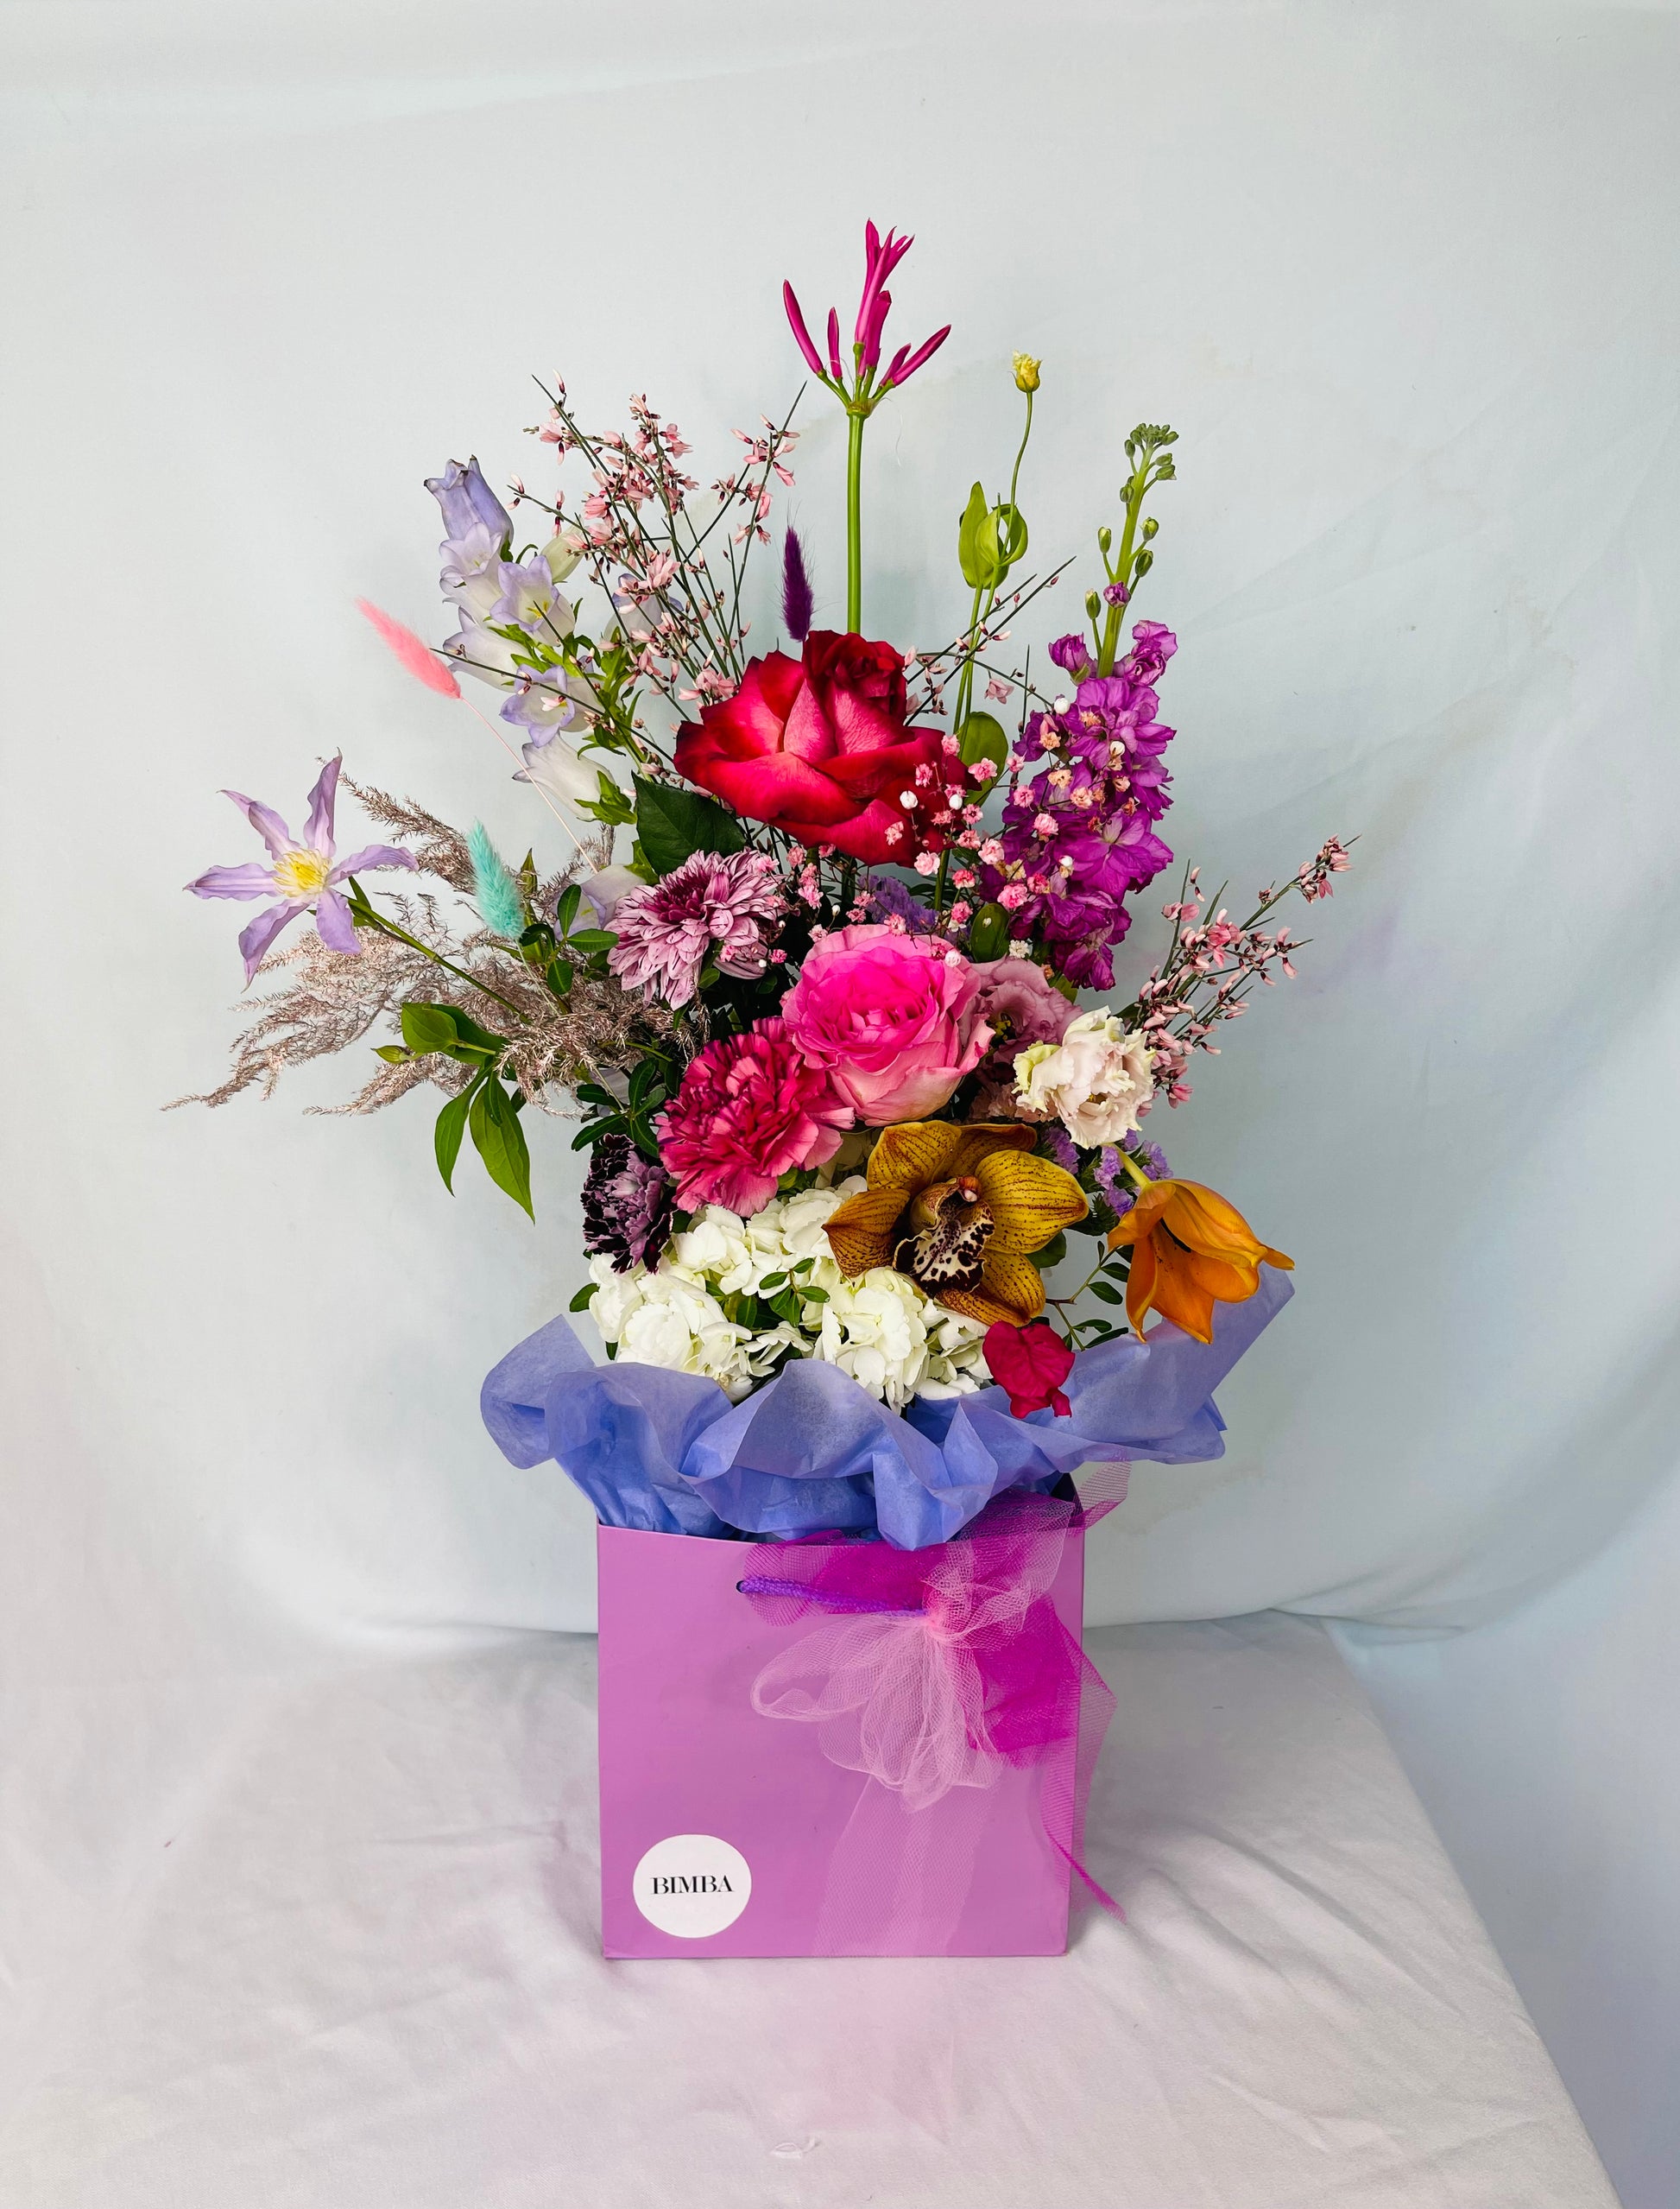 Dancing in the Moon Bouquet is a ovely flower arrangement featuring sweet scented roses, French clematis , double bloom lisianthus, rainbow Gypsophila, luxury cymbidium orchids, sweet scented delphinium, playful bunny tails, champagne asparagus fern and sweet scented eucalyptus. By Bimba Floral Studio.